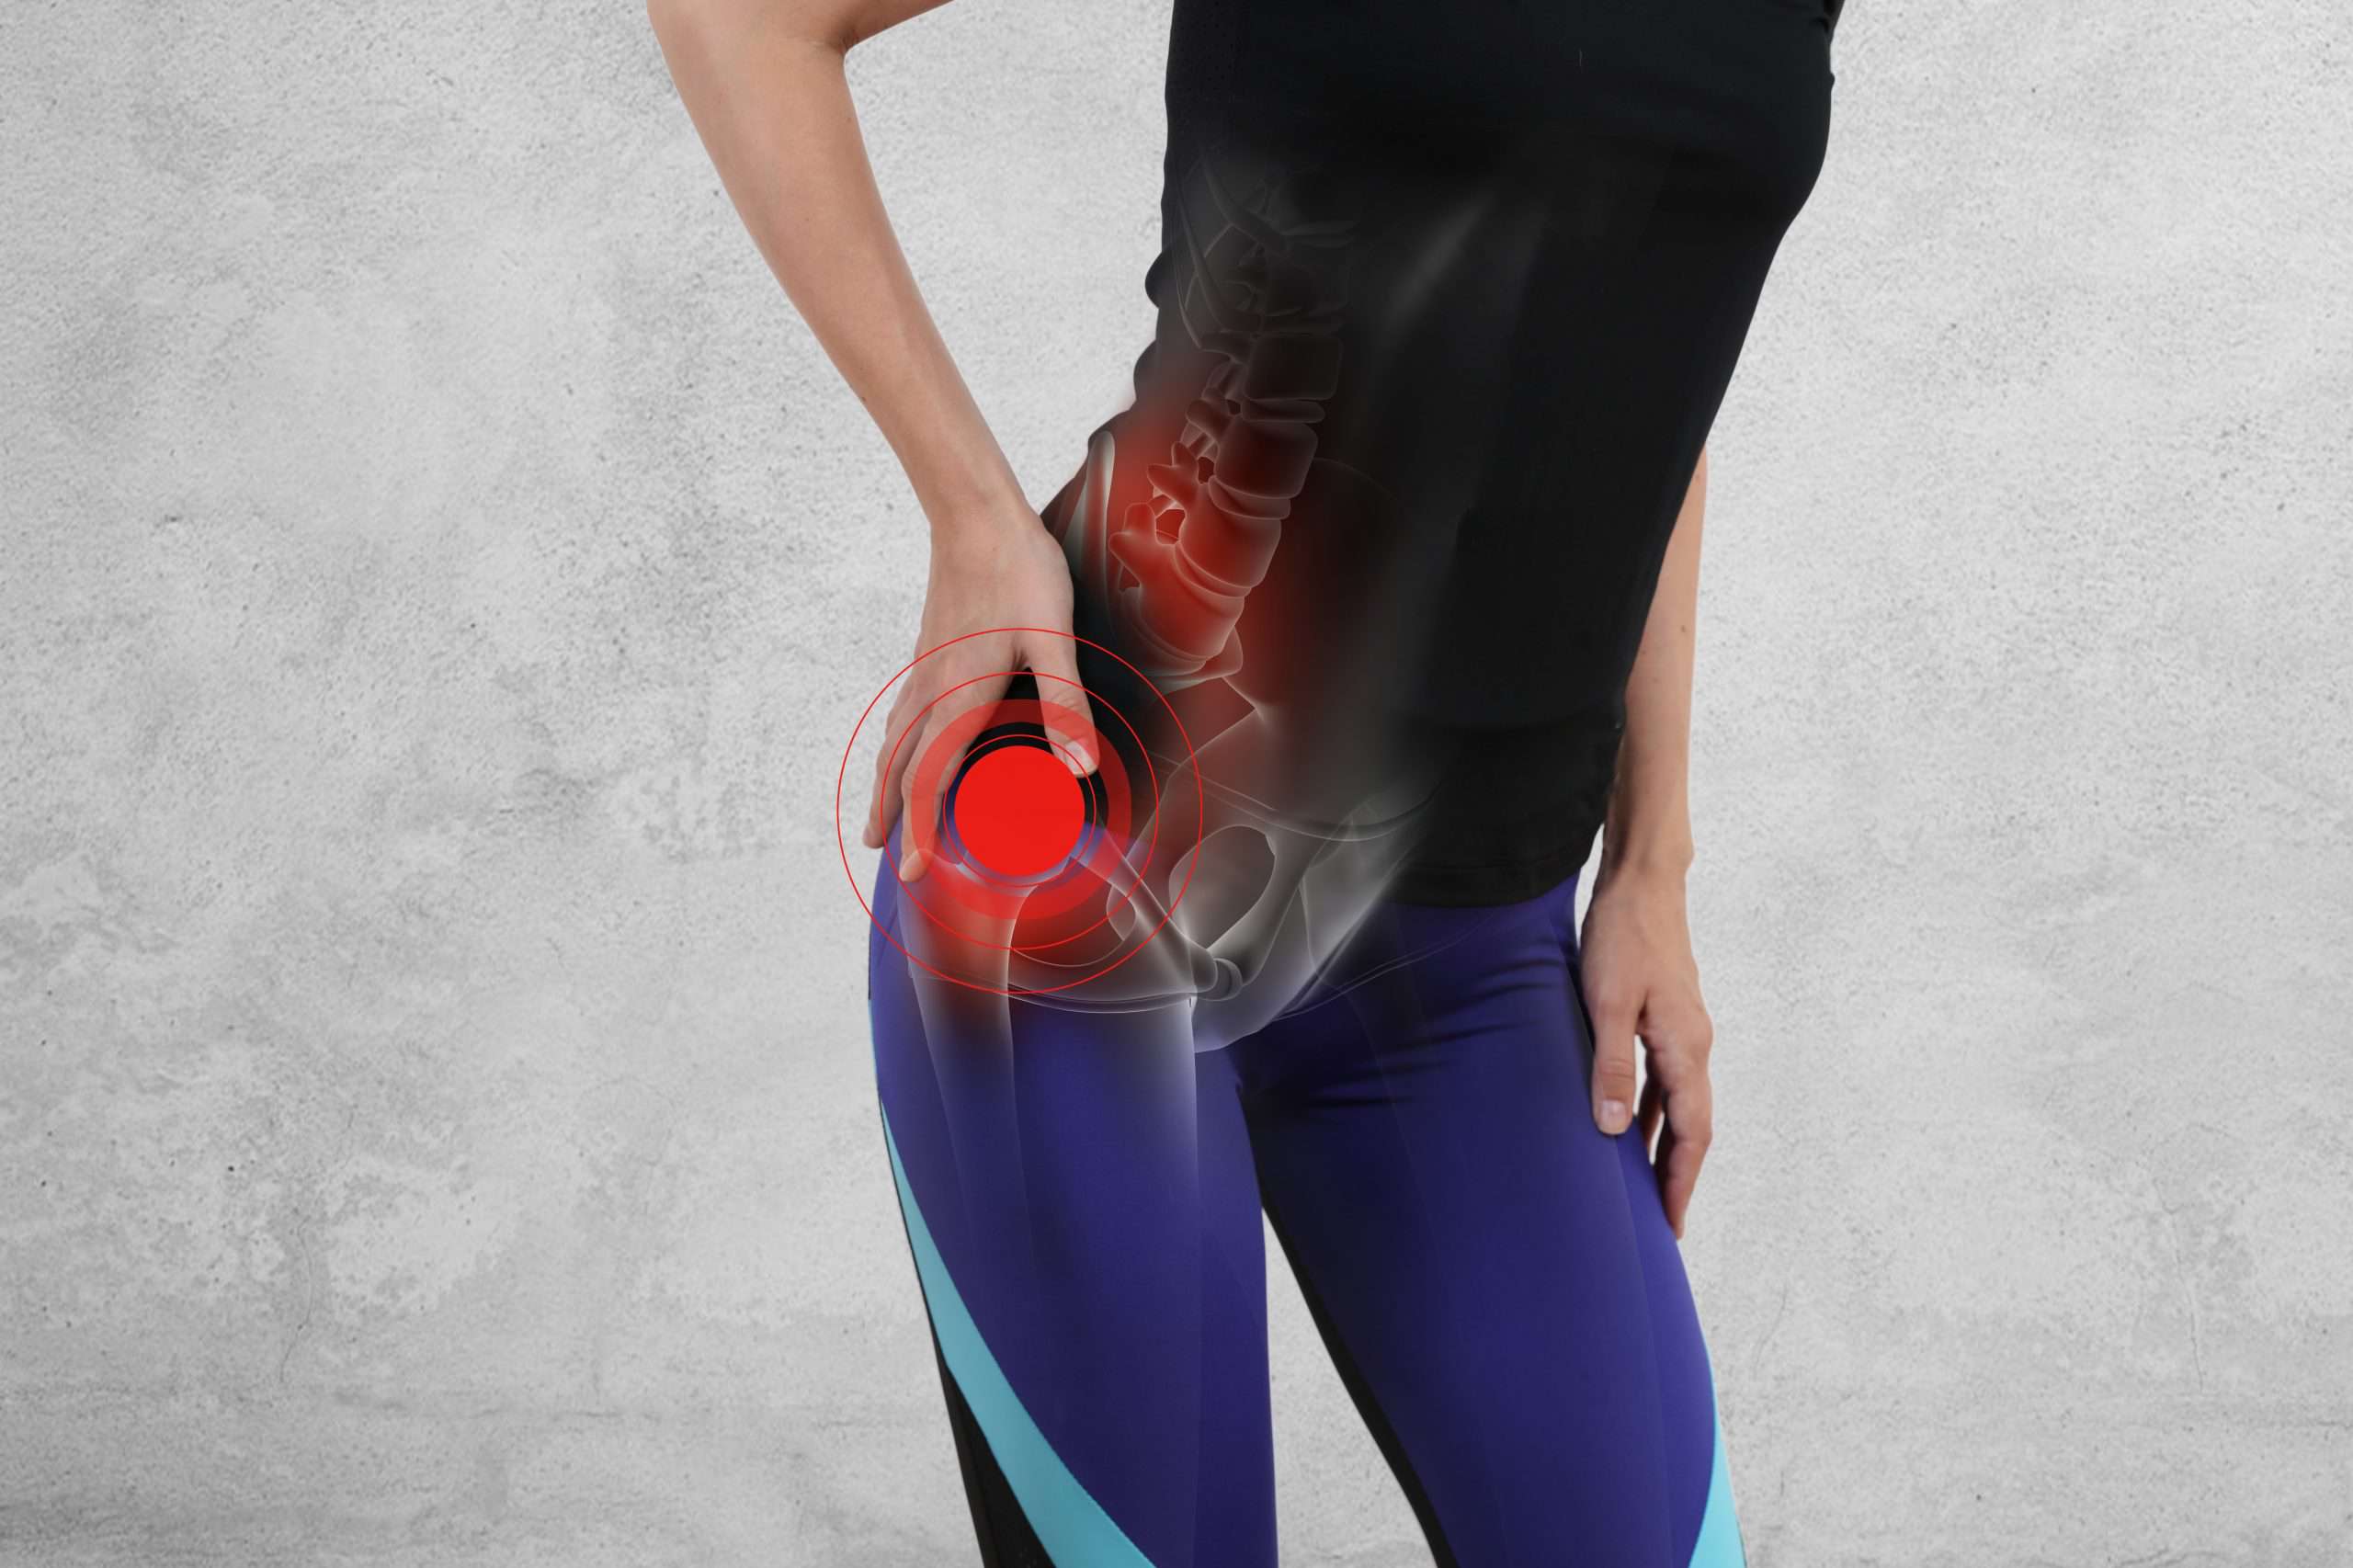 Total Hip Replacement FAQ - Scottsdale Joint Center